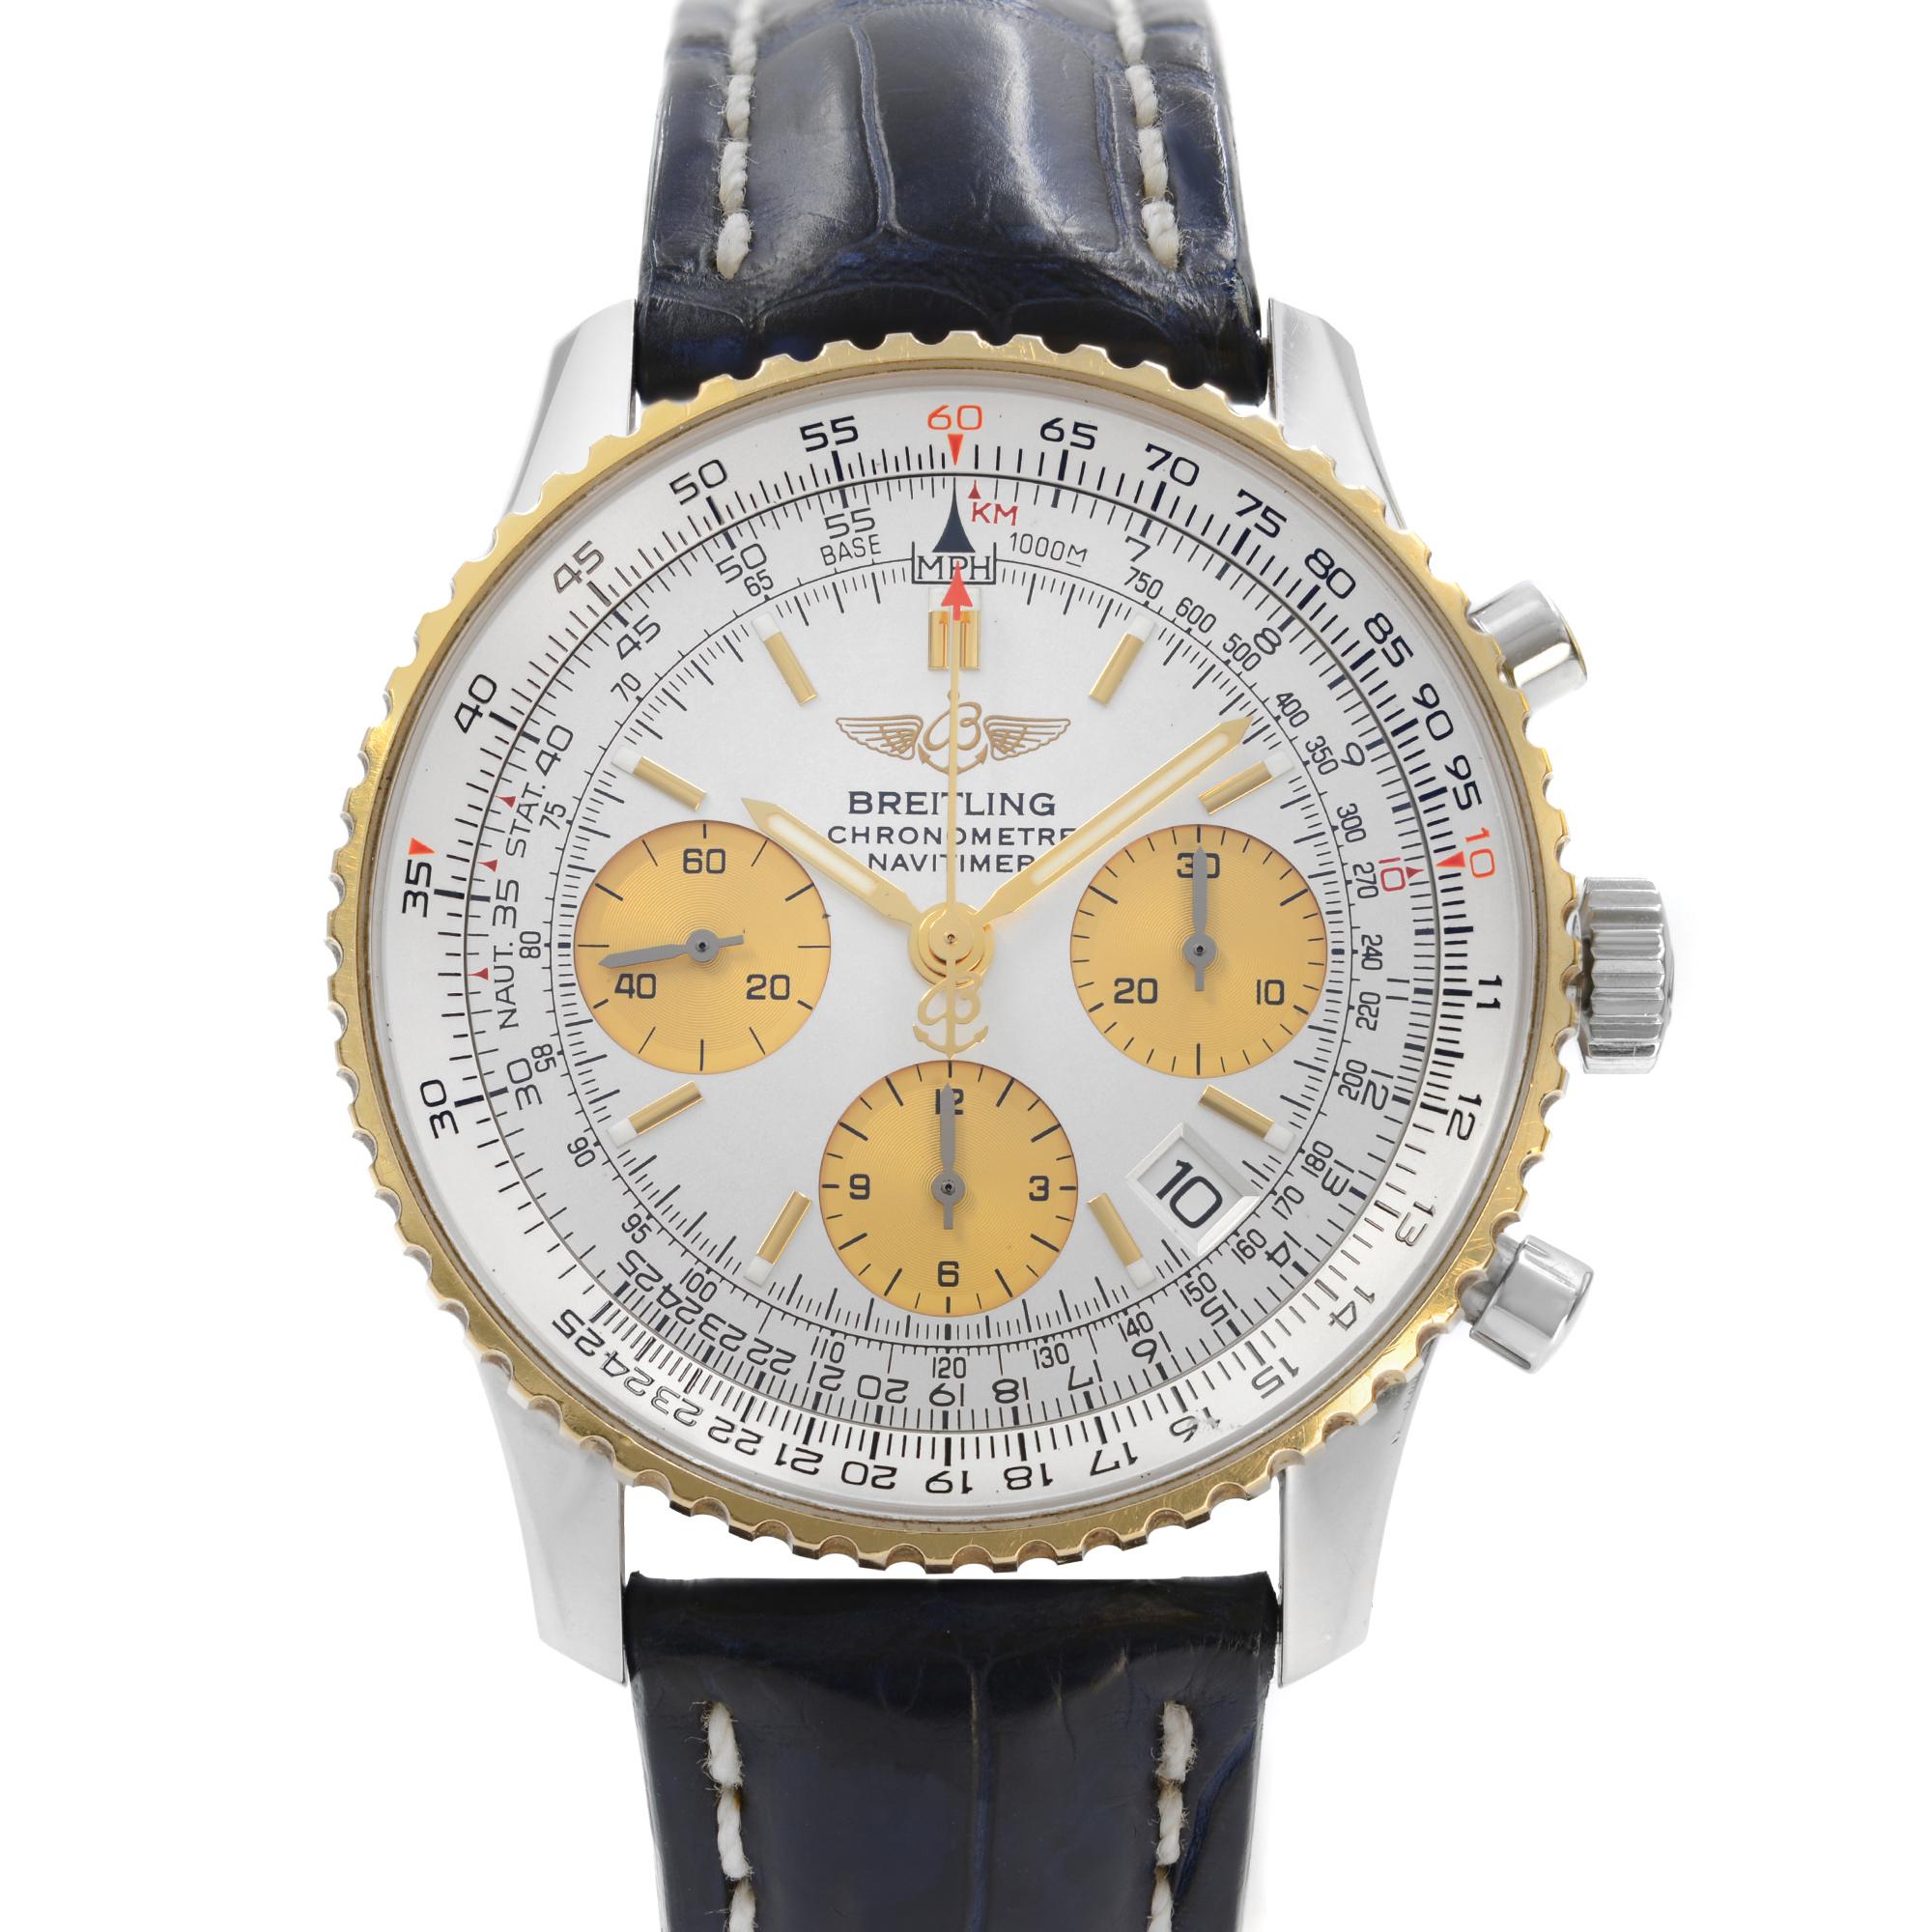 Pre-owned Breitling Navitimer 42mm 18K Gold Steel Silver Dial Men's Automatic Watch D23322. 18k yellow gold bezel. This Beautiful Timepeaice is Powered by an Automatic Movement and Features: Chronograph, Date indicator Between 4-5 O'Clock, and